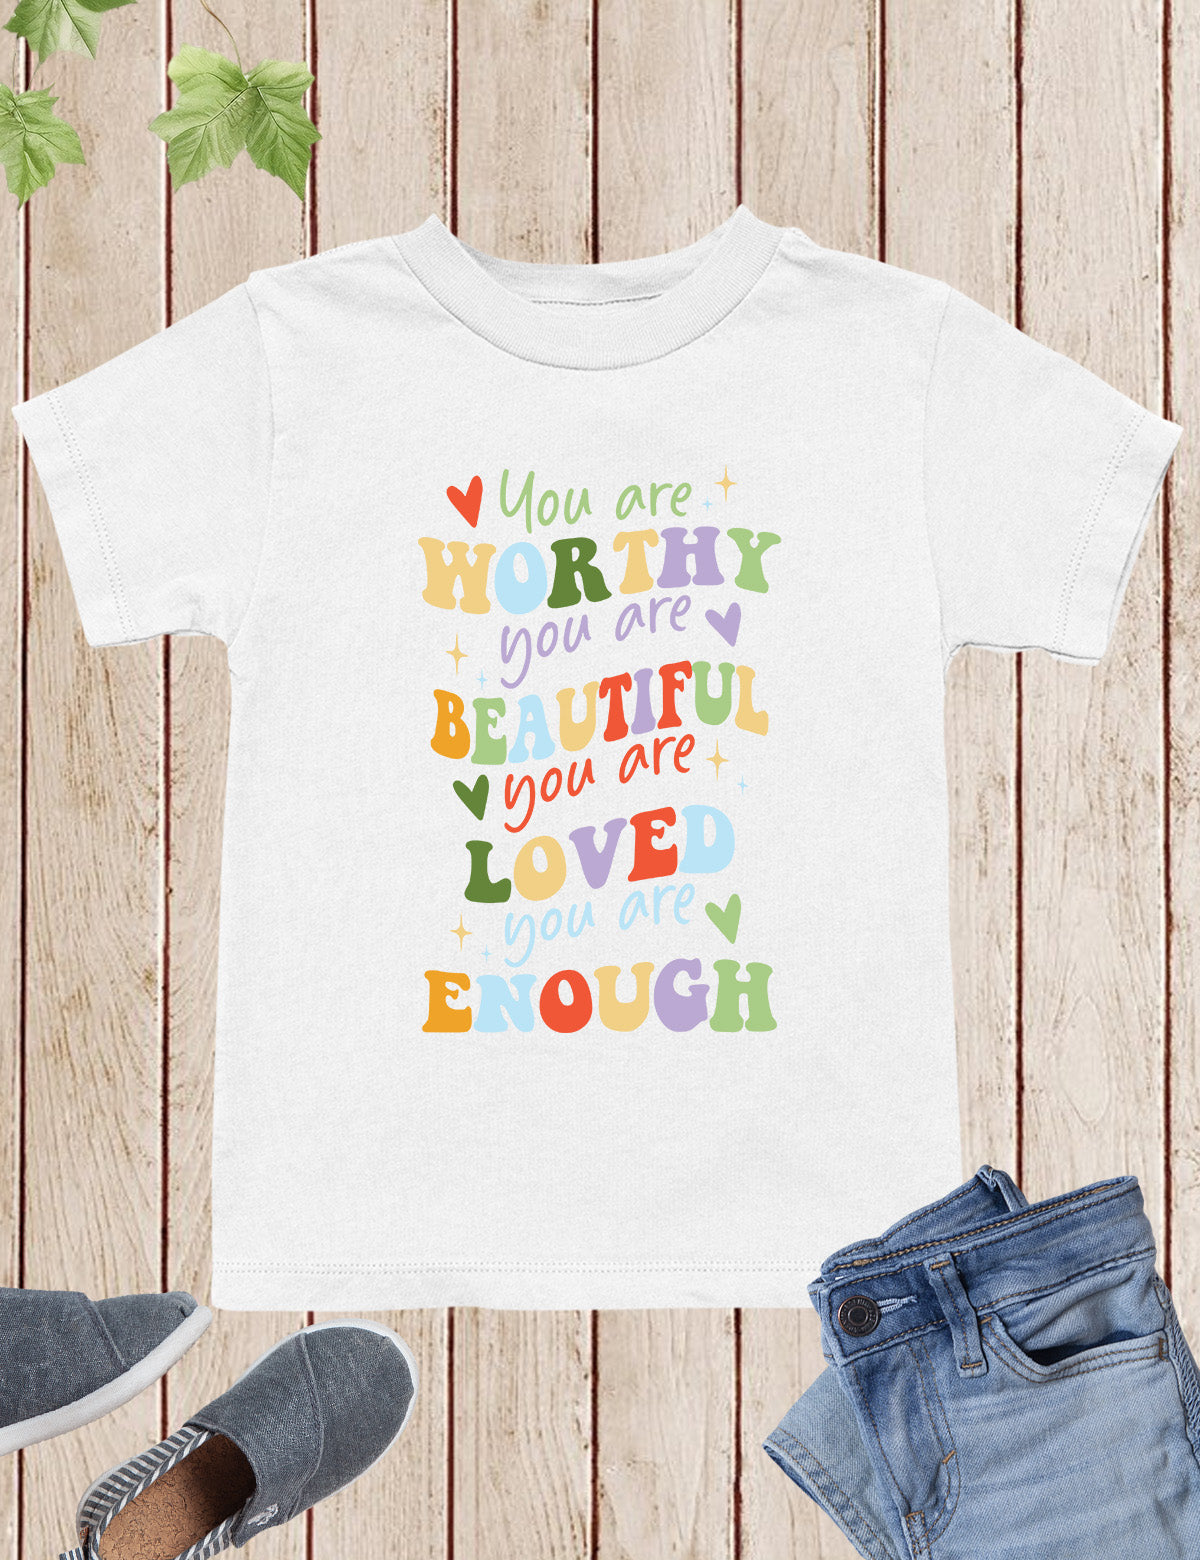 You are Worthy Beautiful Loved Enough Jesus Kids Shirt